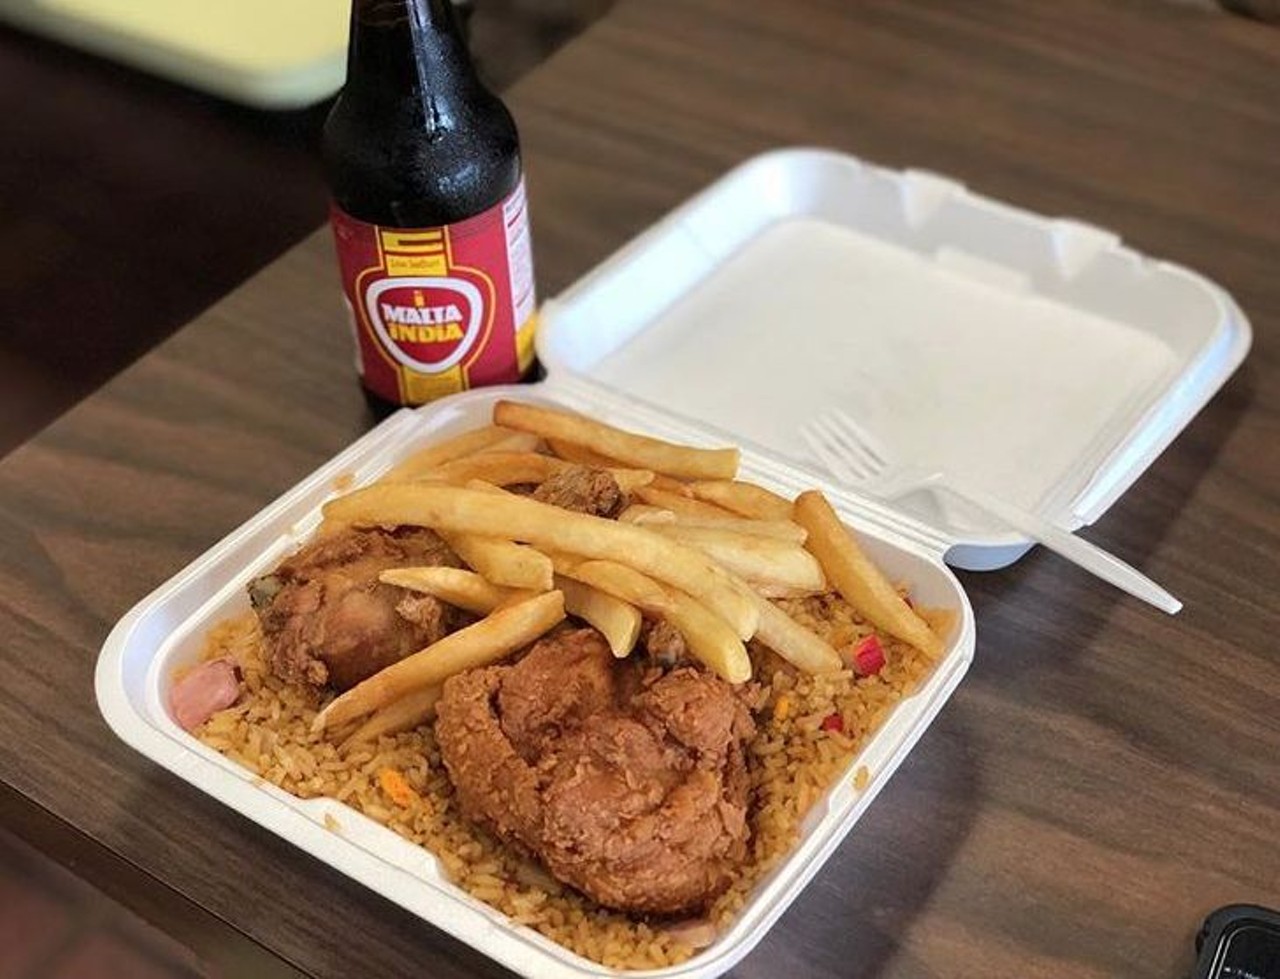 Chirico Fast Food
4302 S Semoran Blvd., (407) 207-0022
As odd as Puerto Rican Chinese food may sound for some, for others, it&#146;s a delicacy and this place serves it up wonderfully. From fried chicken to fried rice, the meals pack flavor and spice alike.
Photo via dannyloski/Instagram